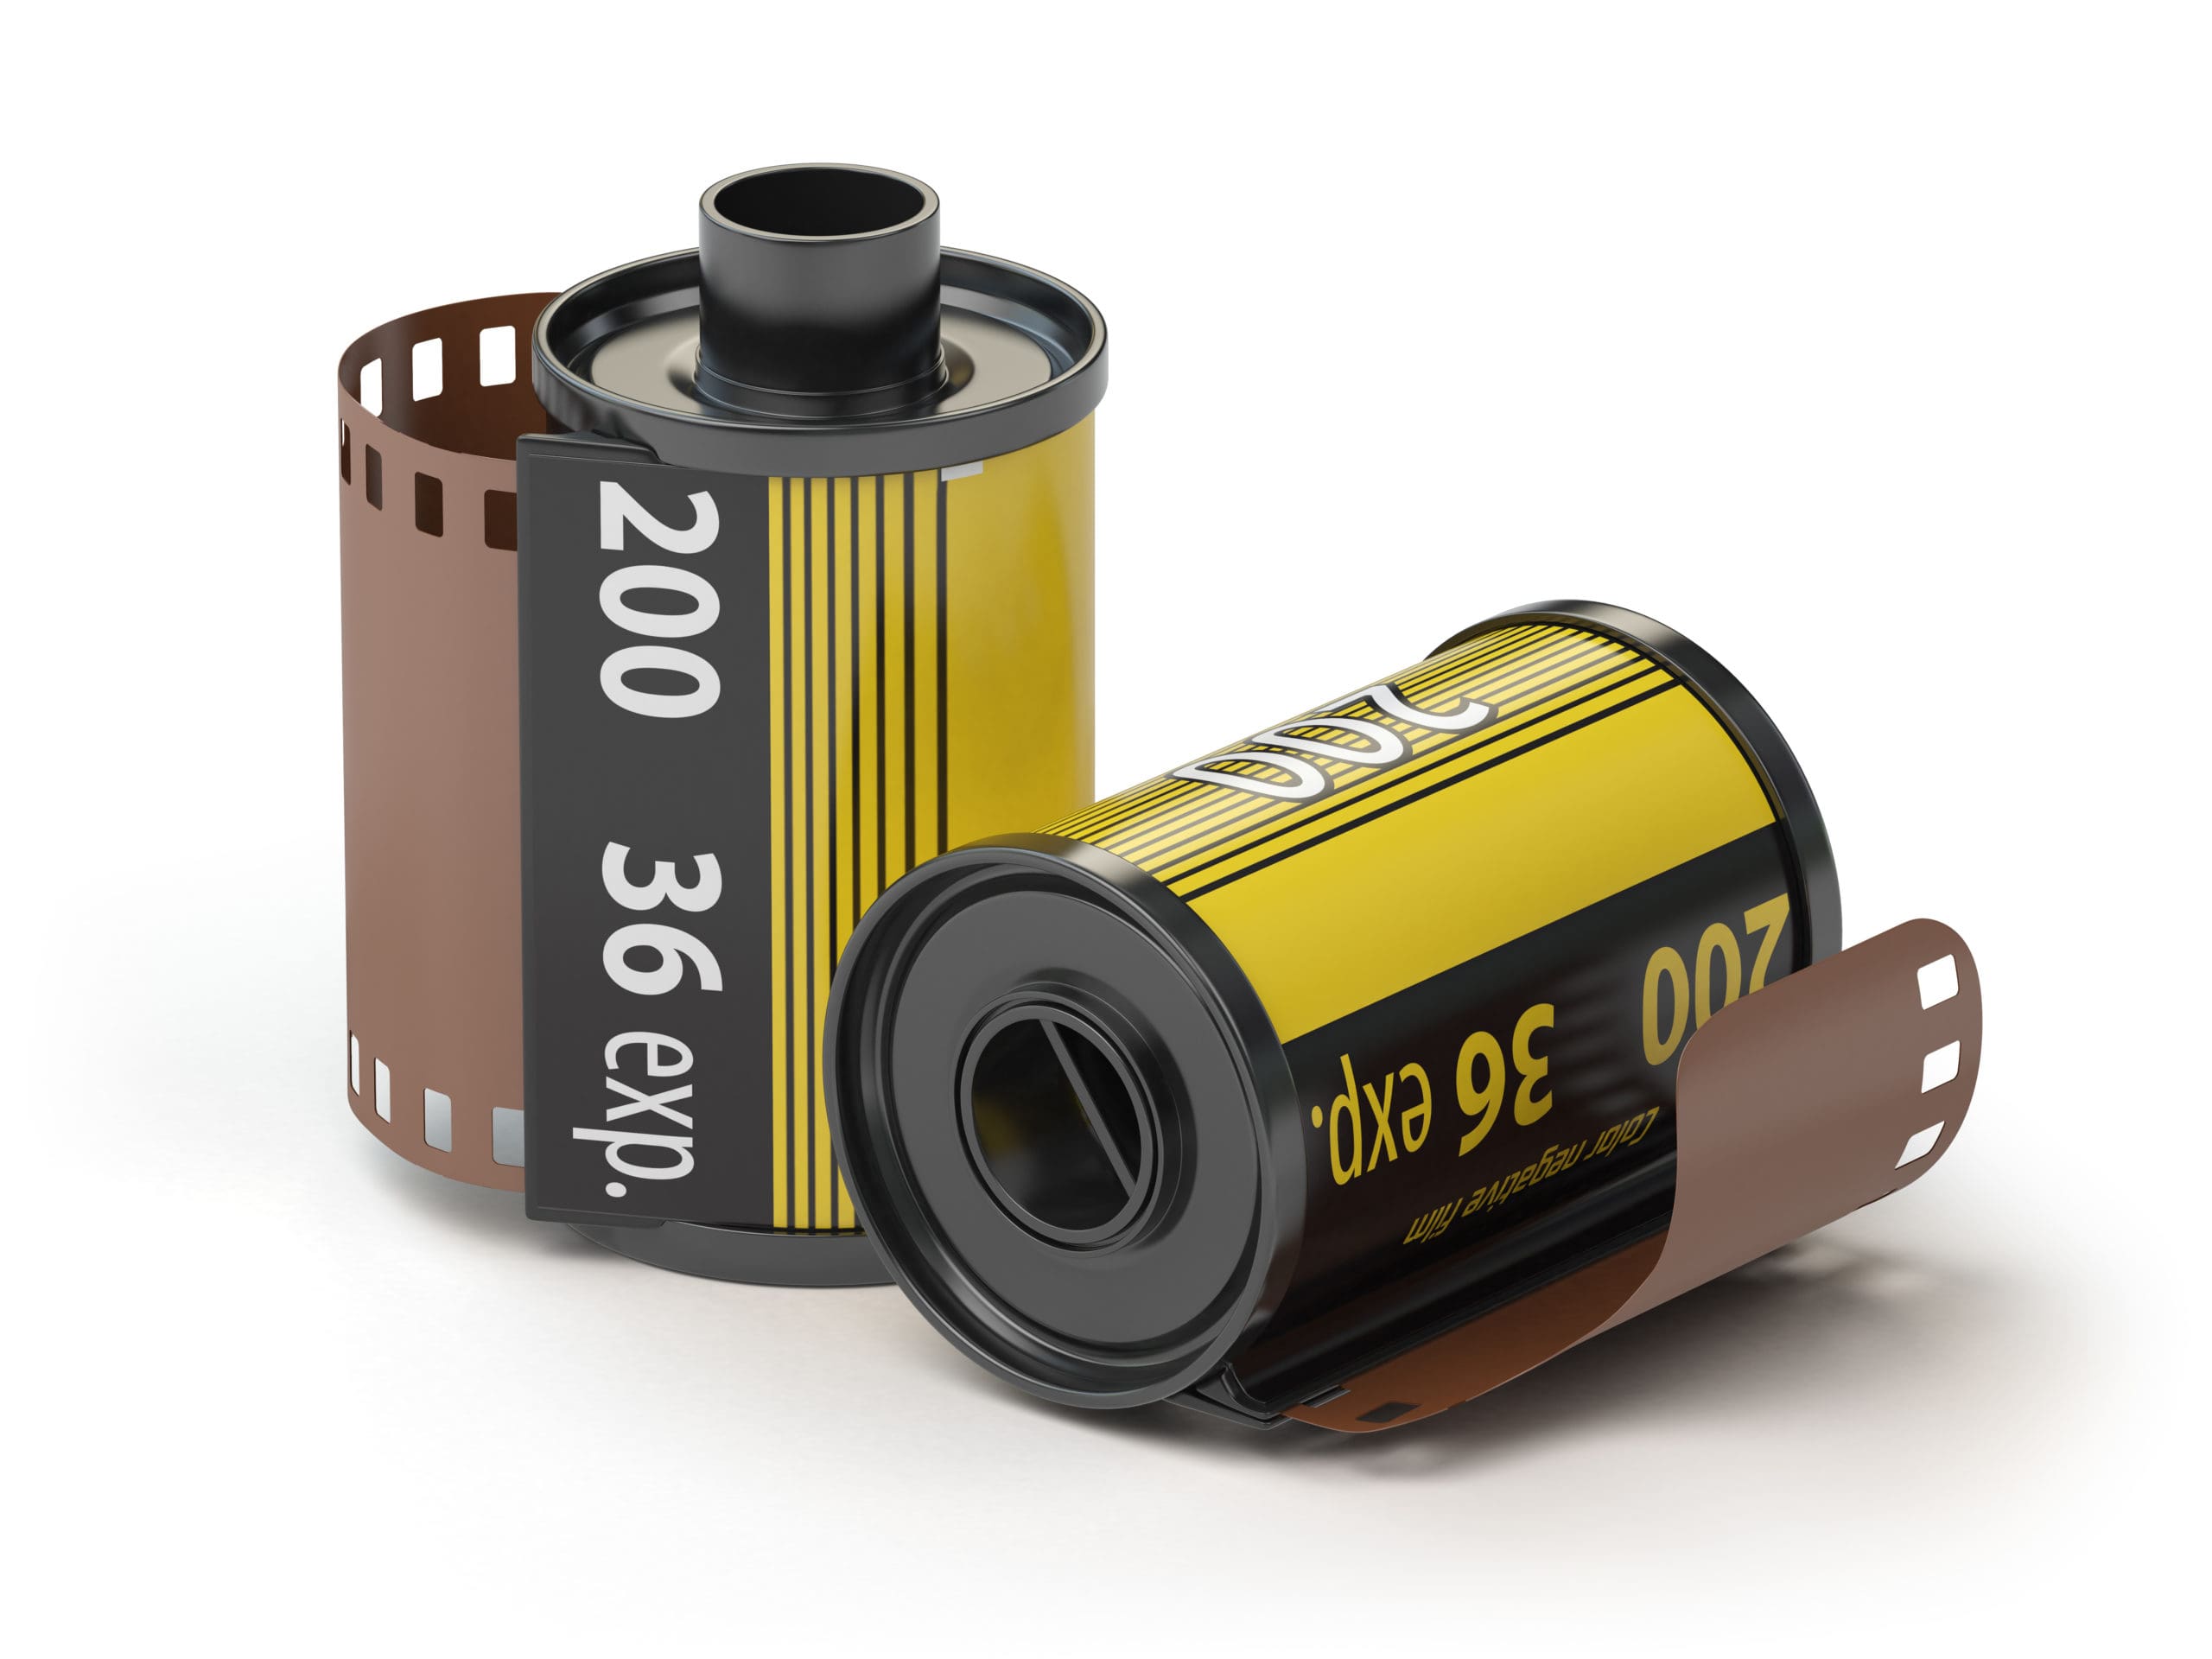 where to buy 35mm film